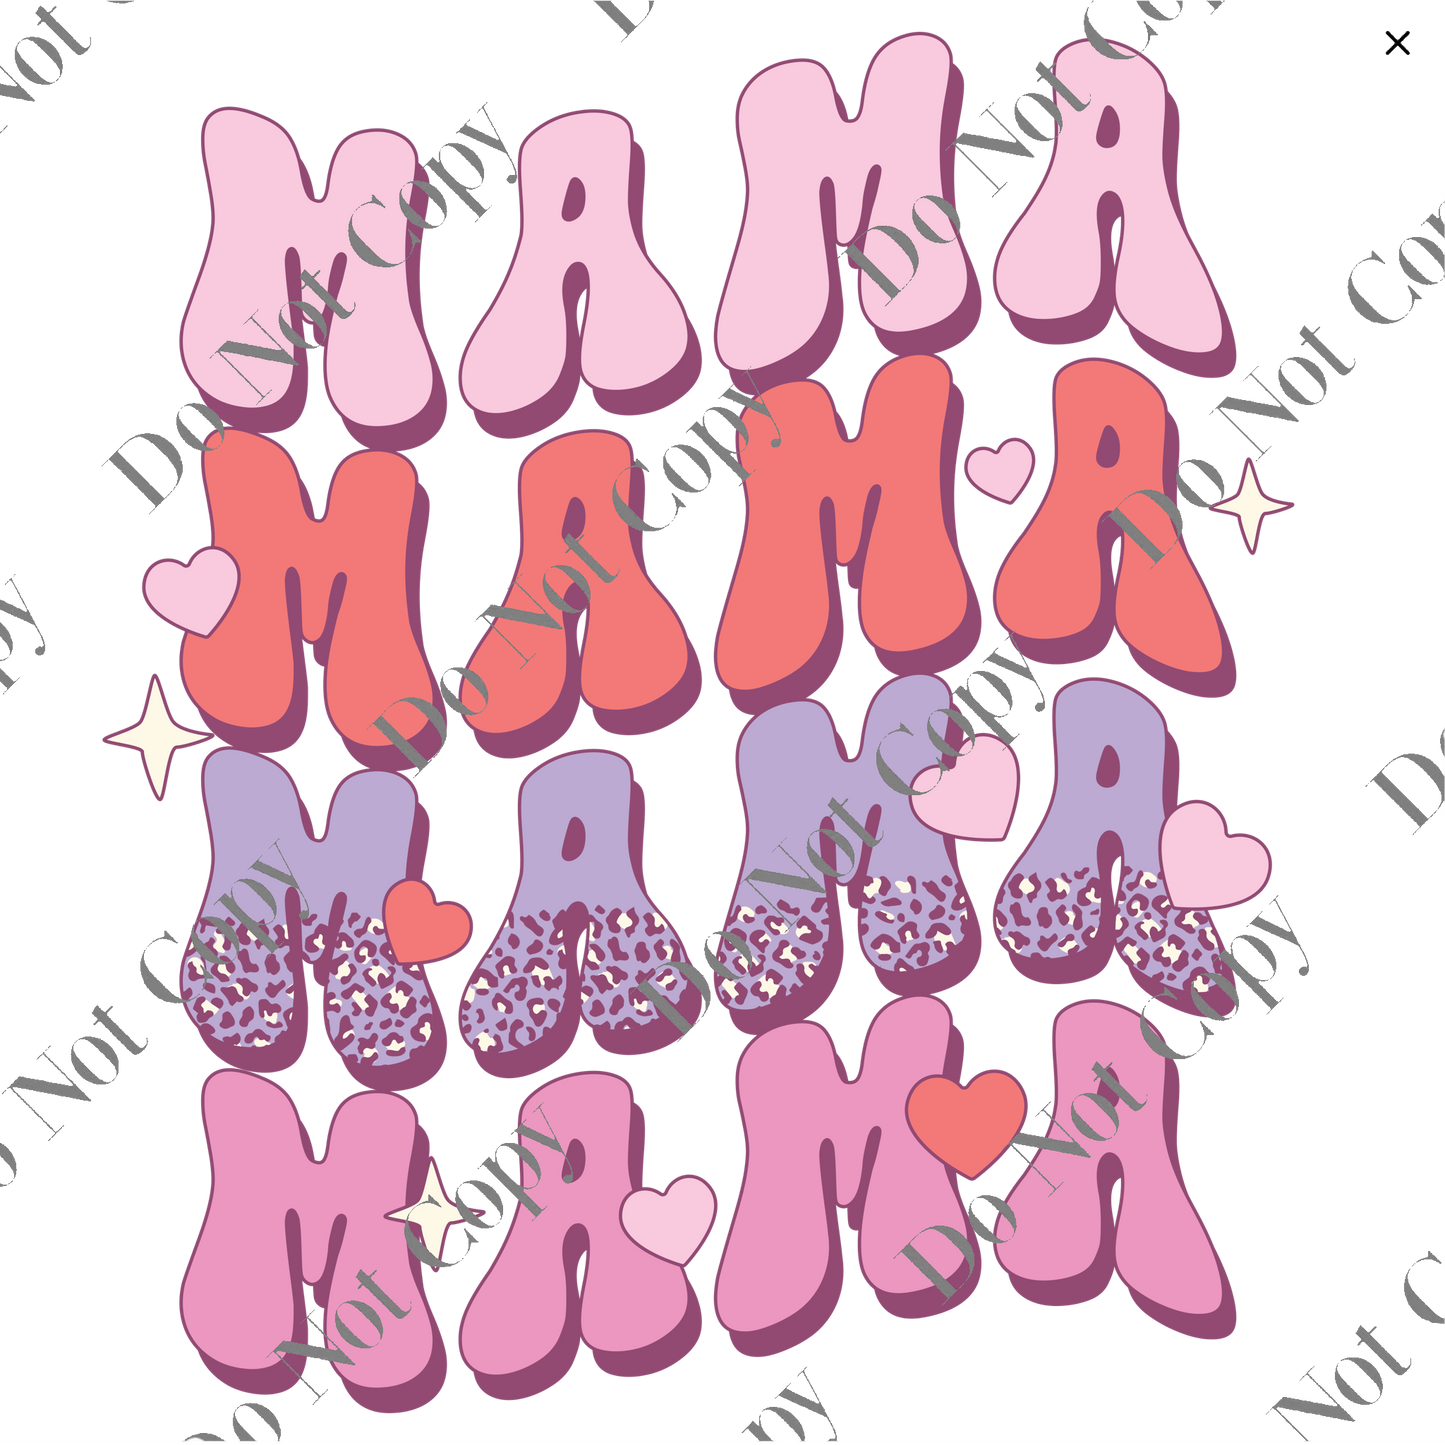 Clear cast Decal -  Mama